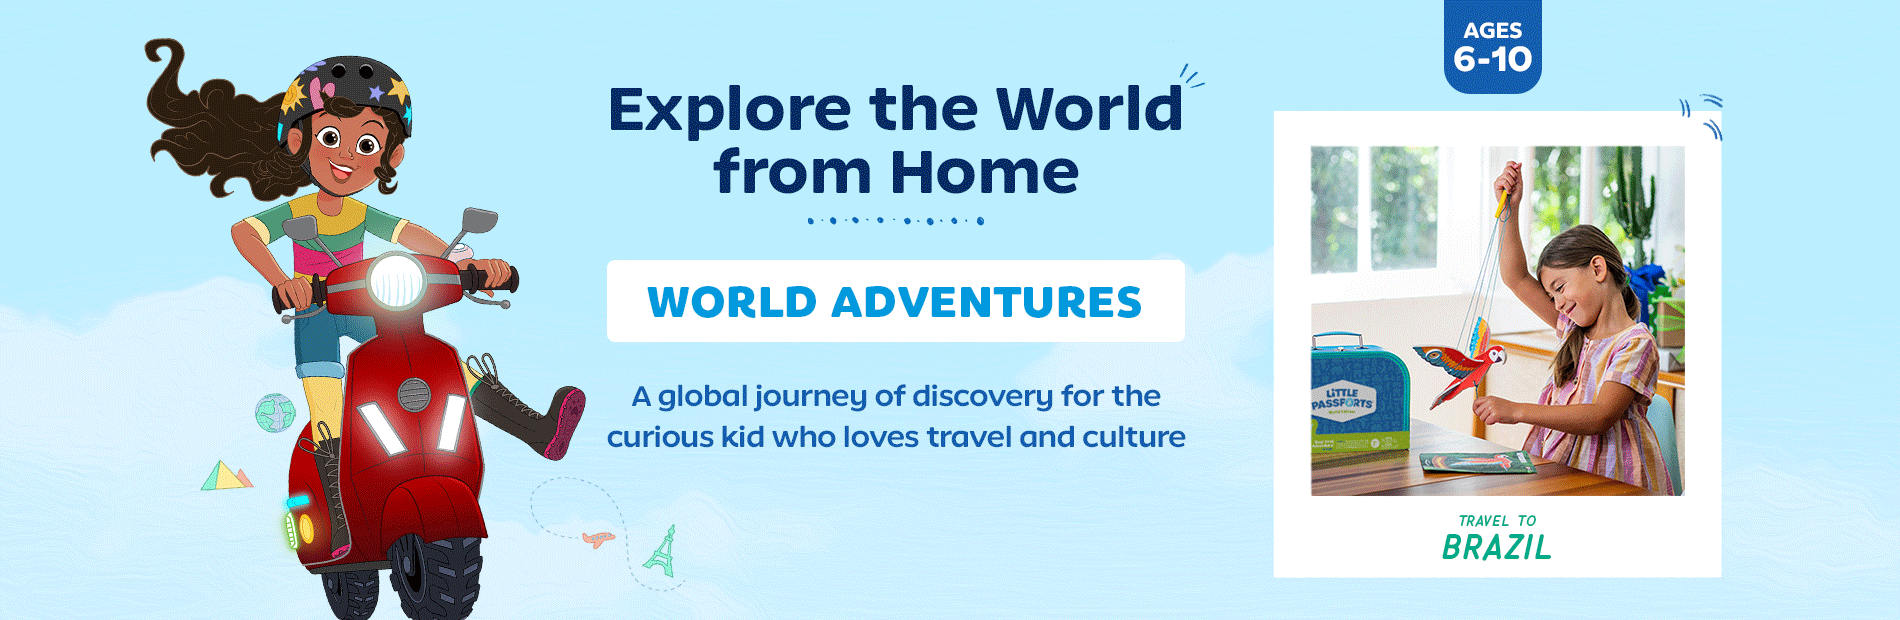 Explore the World from Home WORLD ADVENTURES A global journey of discovery for the curious kid who loves travel and culture